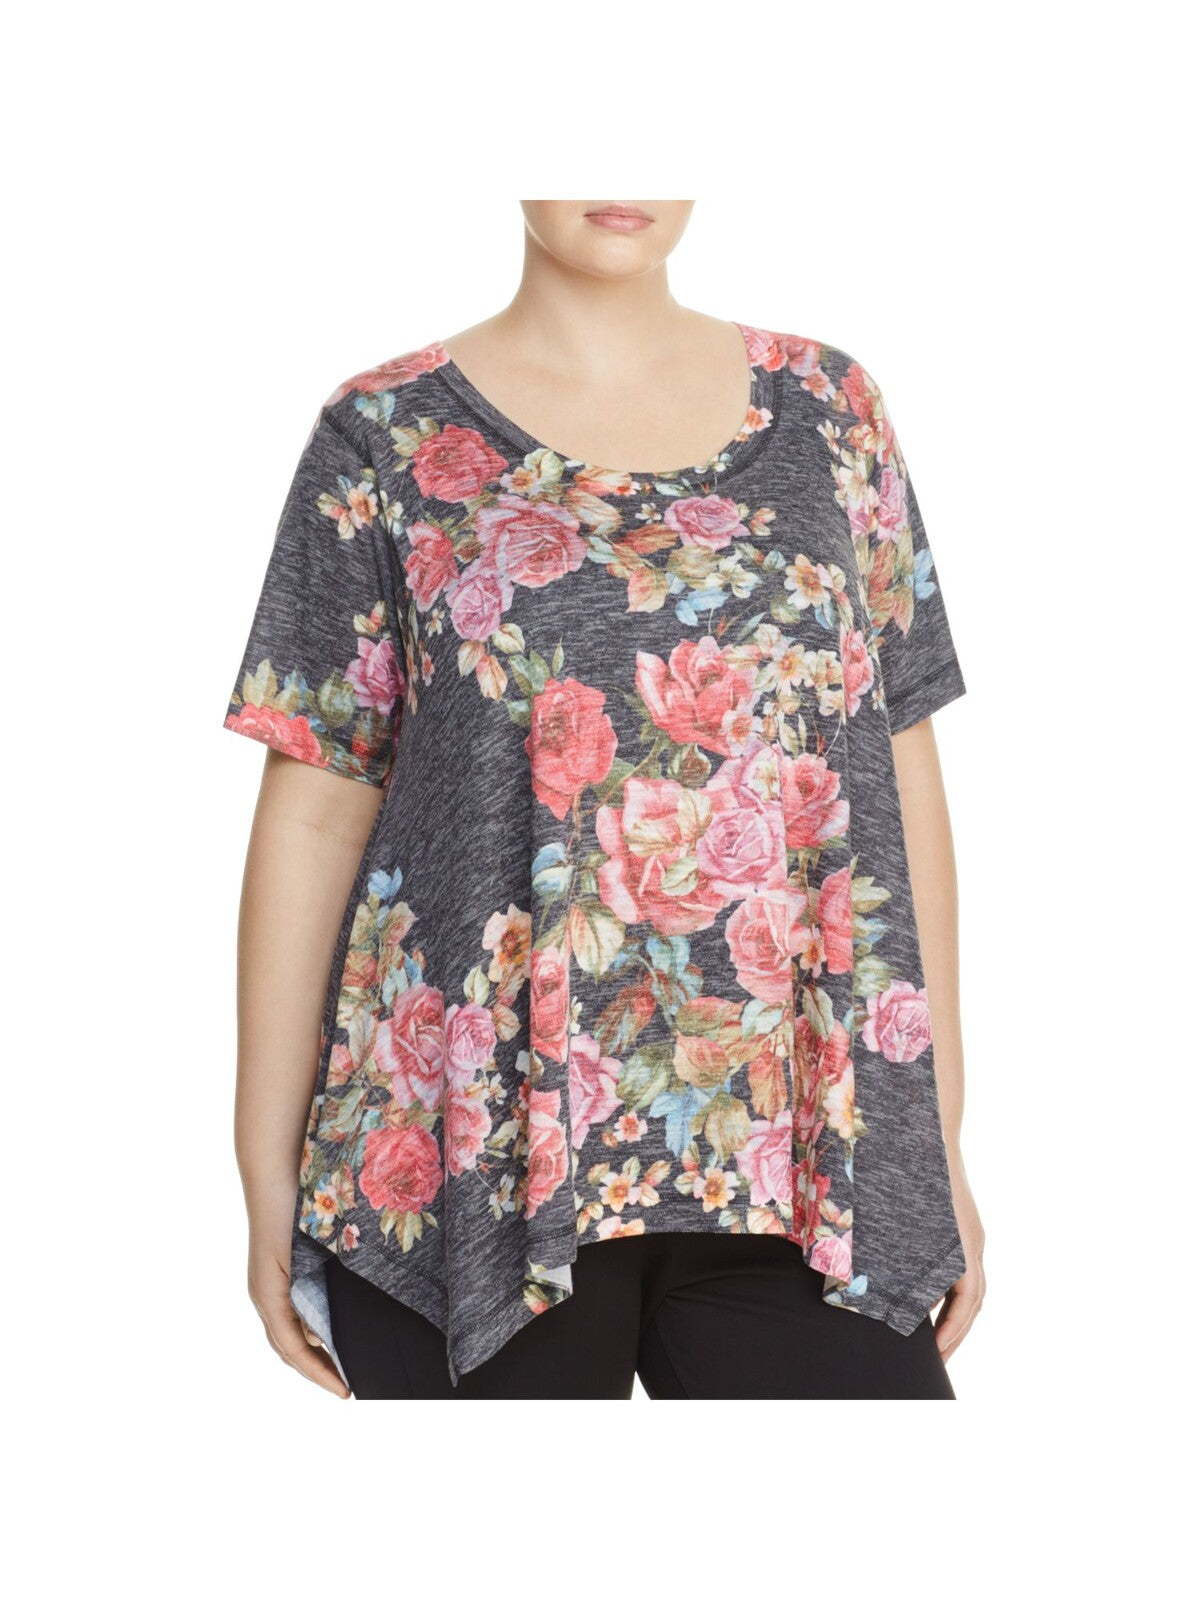 NALLY & MILLIE Womens Gray Floral Short Sleeve Scoop Neck Tunic Top Plus 2X